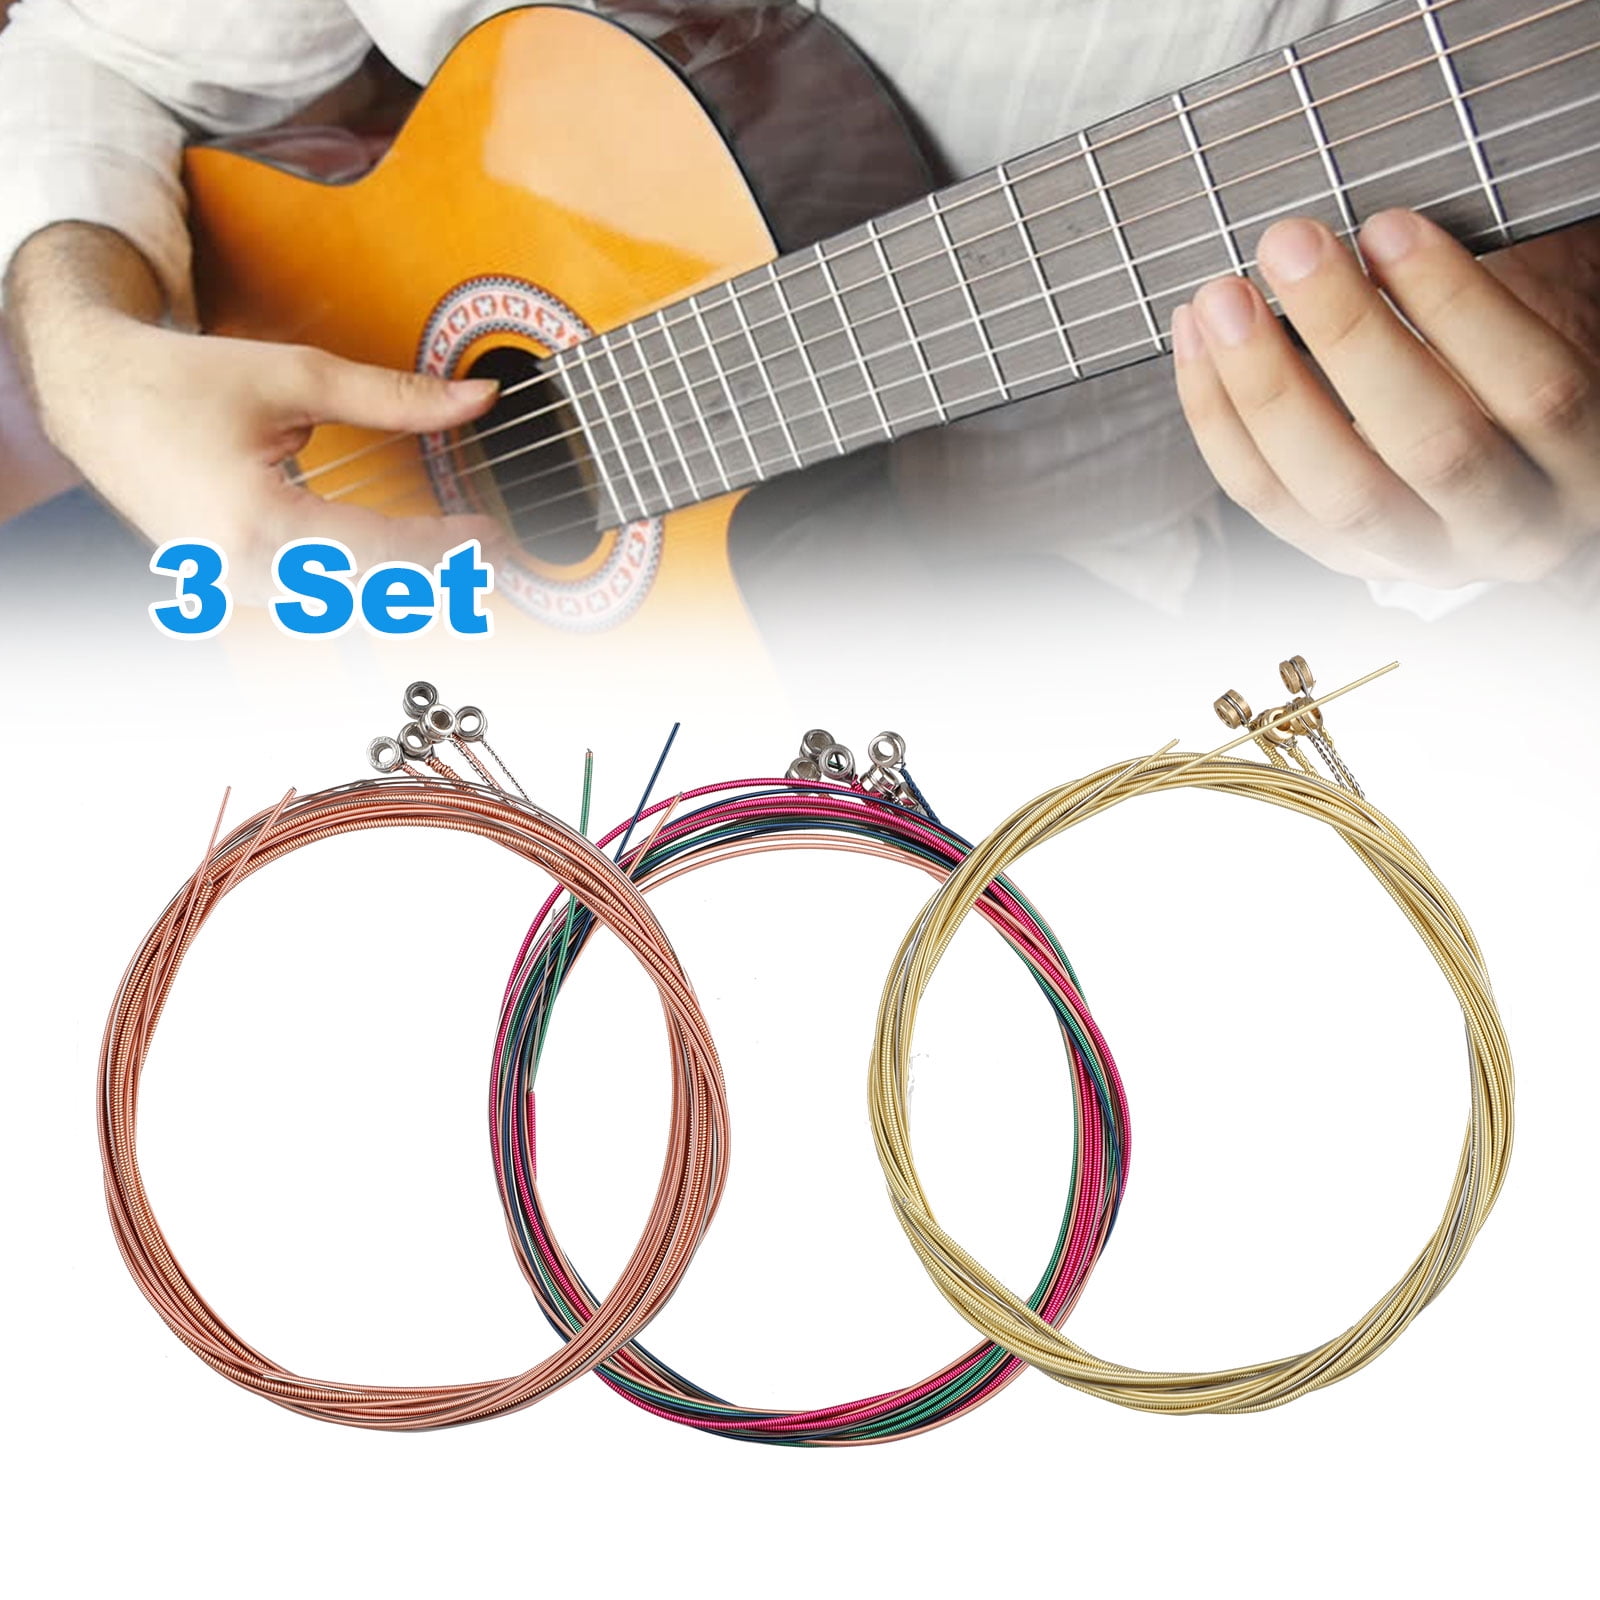 EEEkit 3 Sets of 6 Guitar Strings Replacement Steel String for Acoustic  Guitar (1 Yellow Red Set and 1 Multicolor Set), Picks for Guitar Players  and 